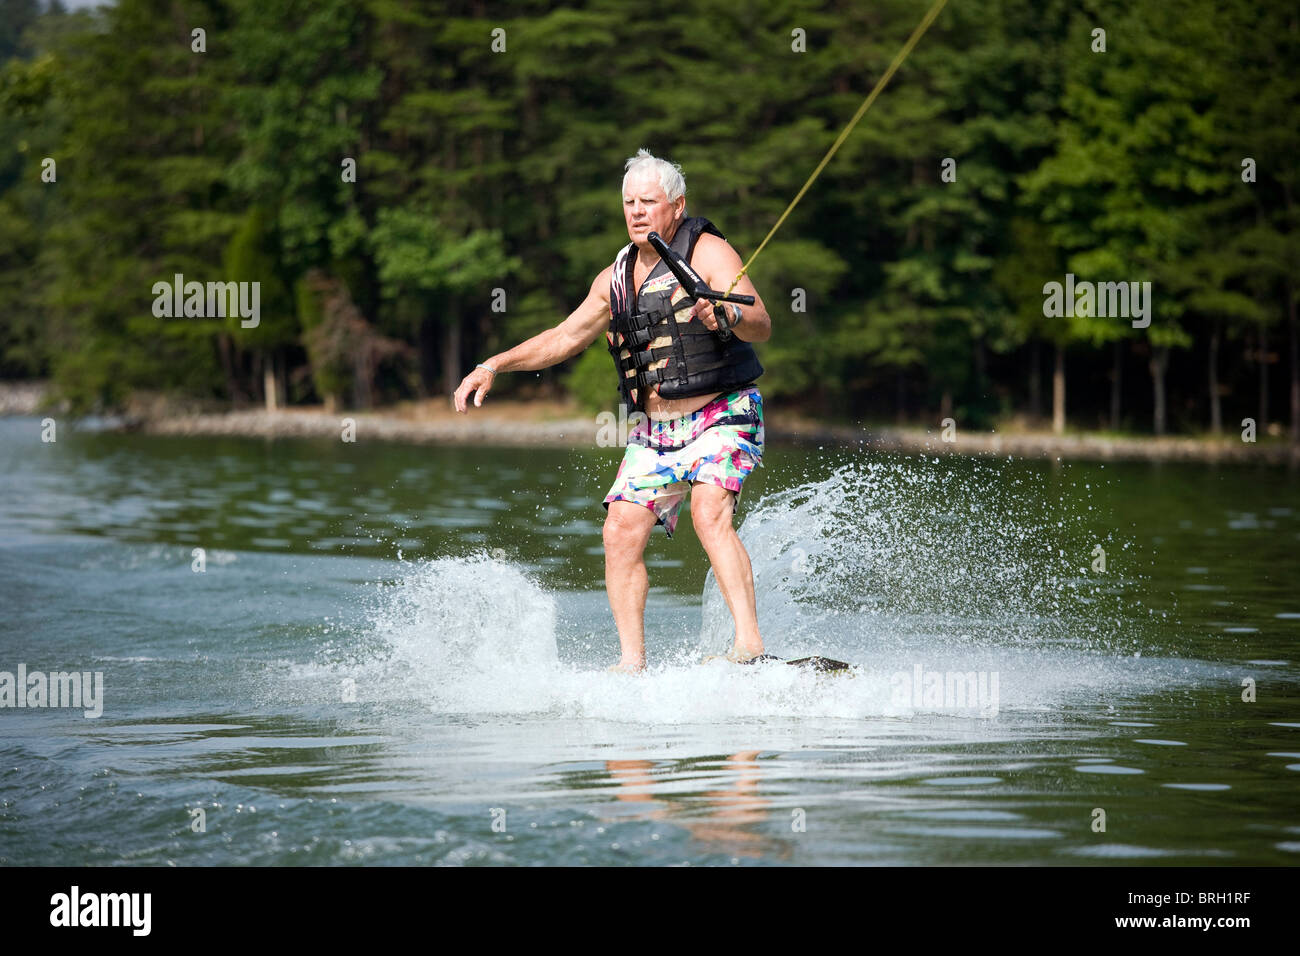 Senior citizen water skiing on a Tennessee lake. Stock Photo